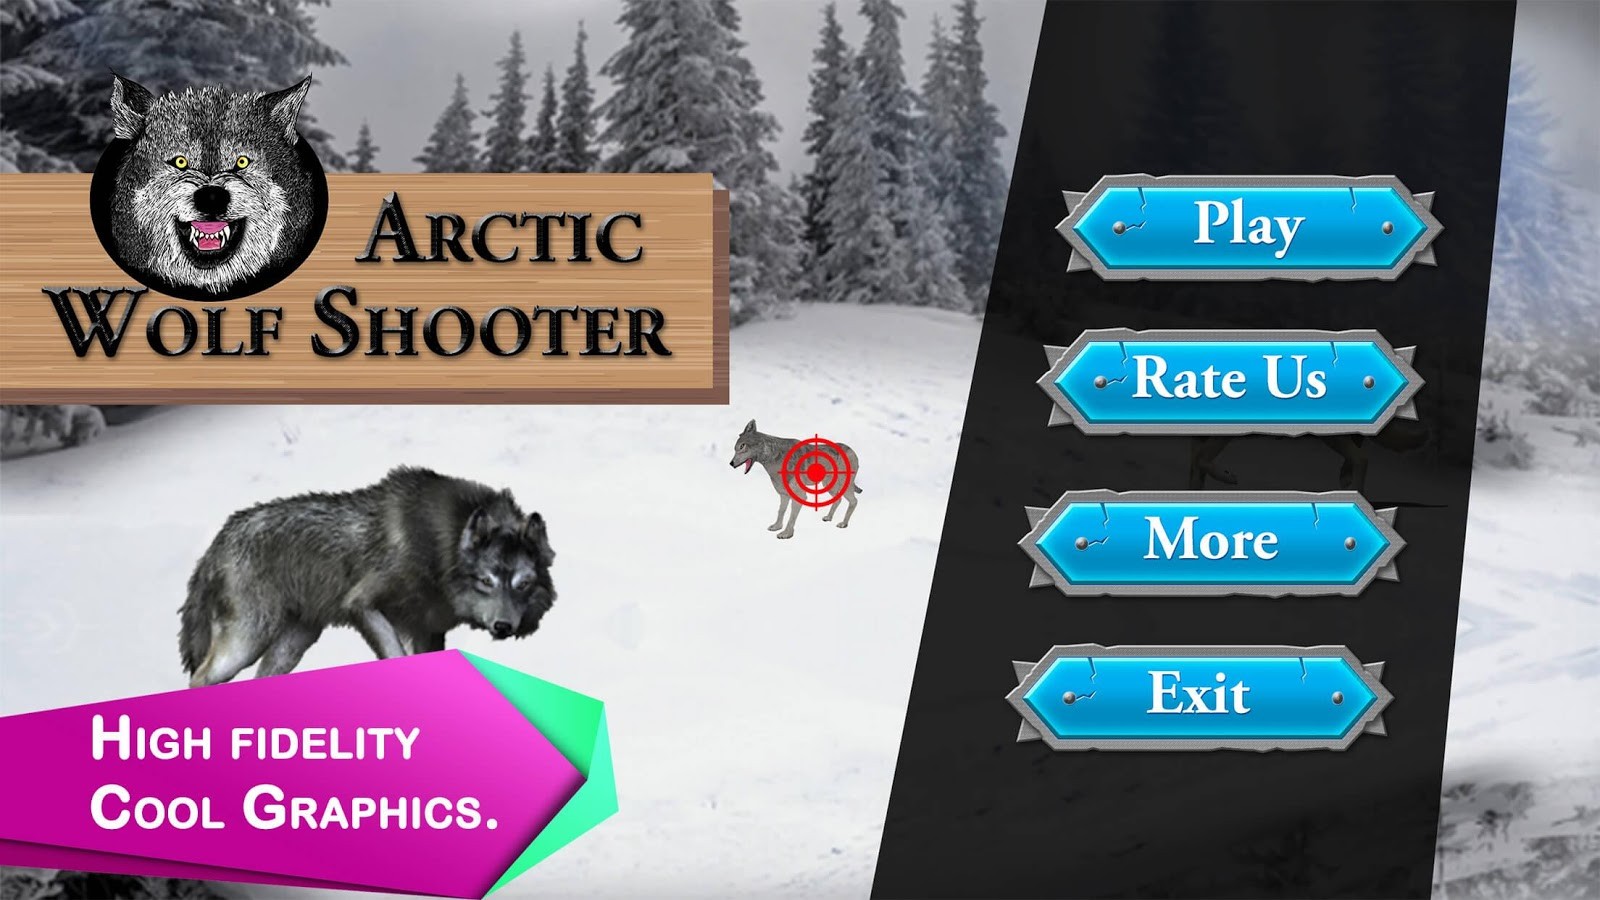 Arctic Wolf Shooter